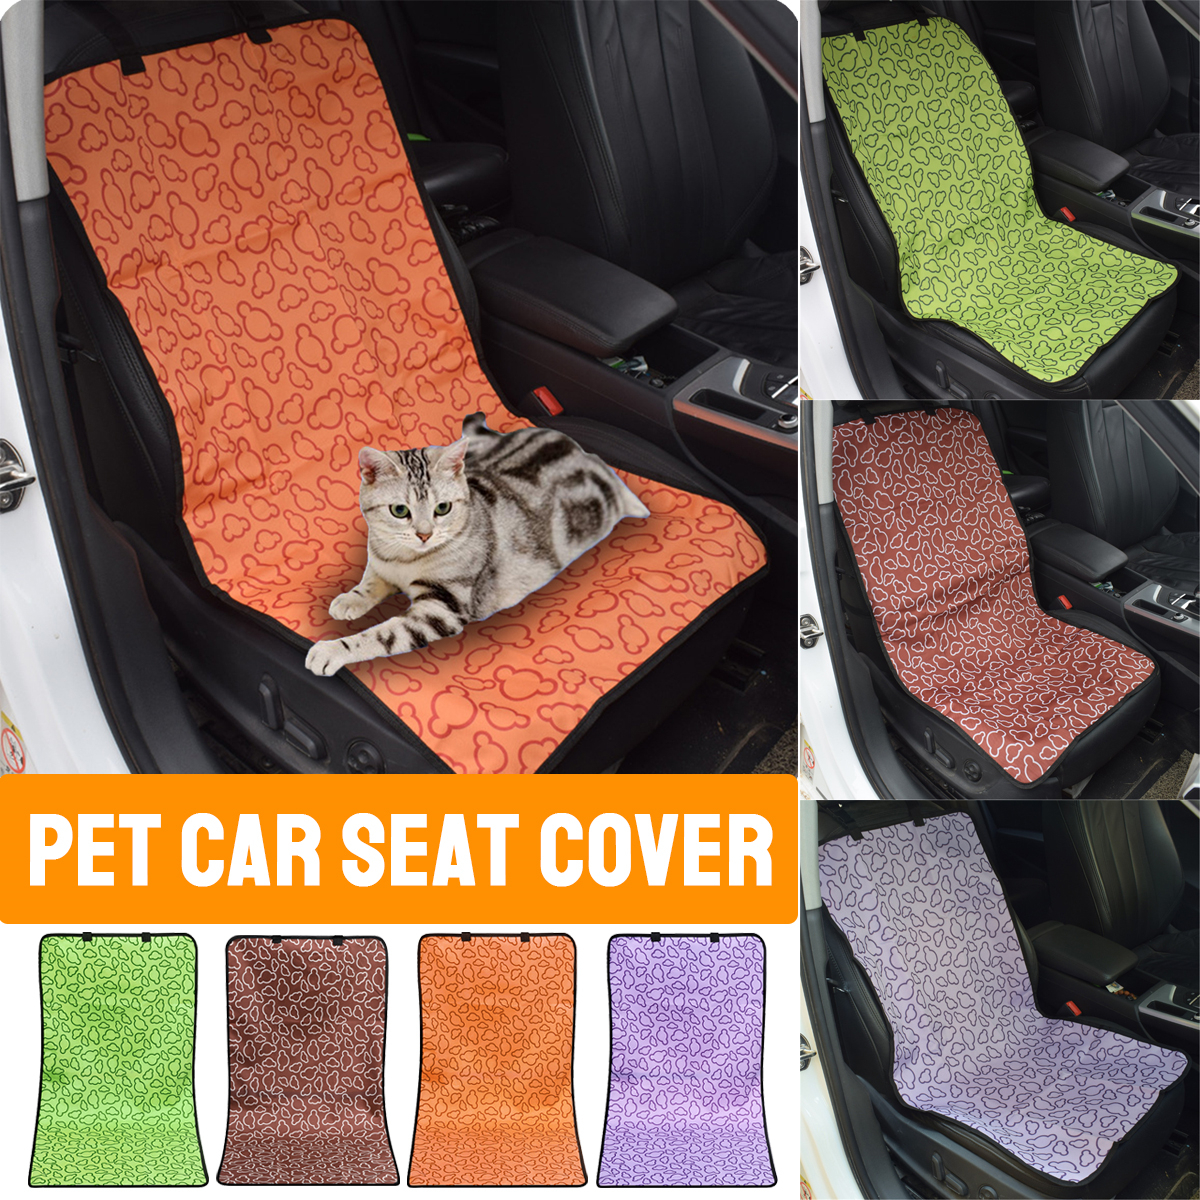 Dog-Car-Front-Seat-Cover-Waterproof-Pet-Cat-Dog-Carrier-Mat-for-Cars-SUV-Front-Seat-Cushion-Protecto-1809568-1